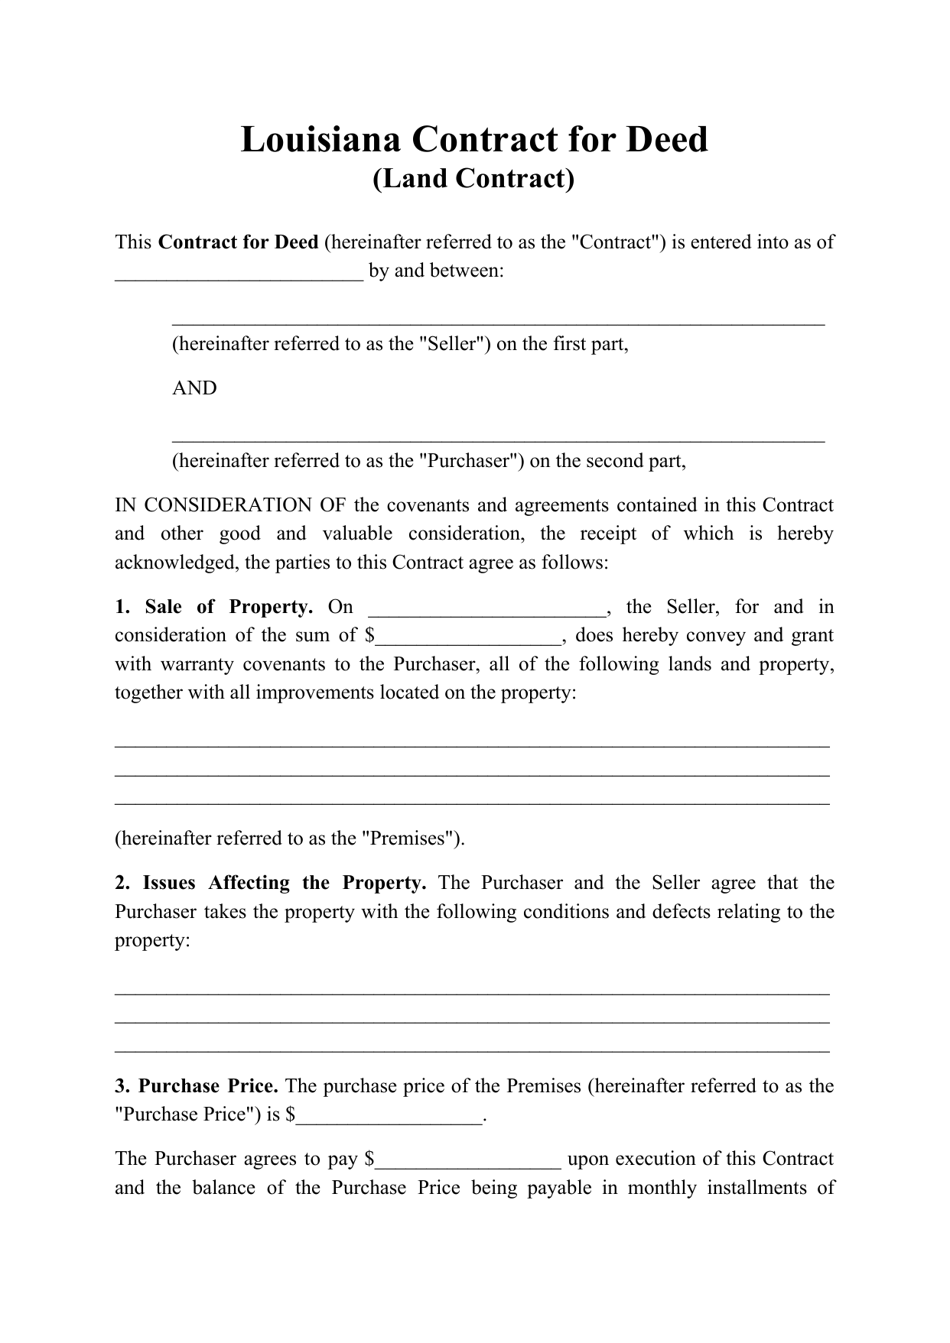 Contract for Deed (Land Contract) - Louisiana, Page 1